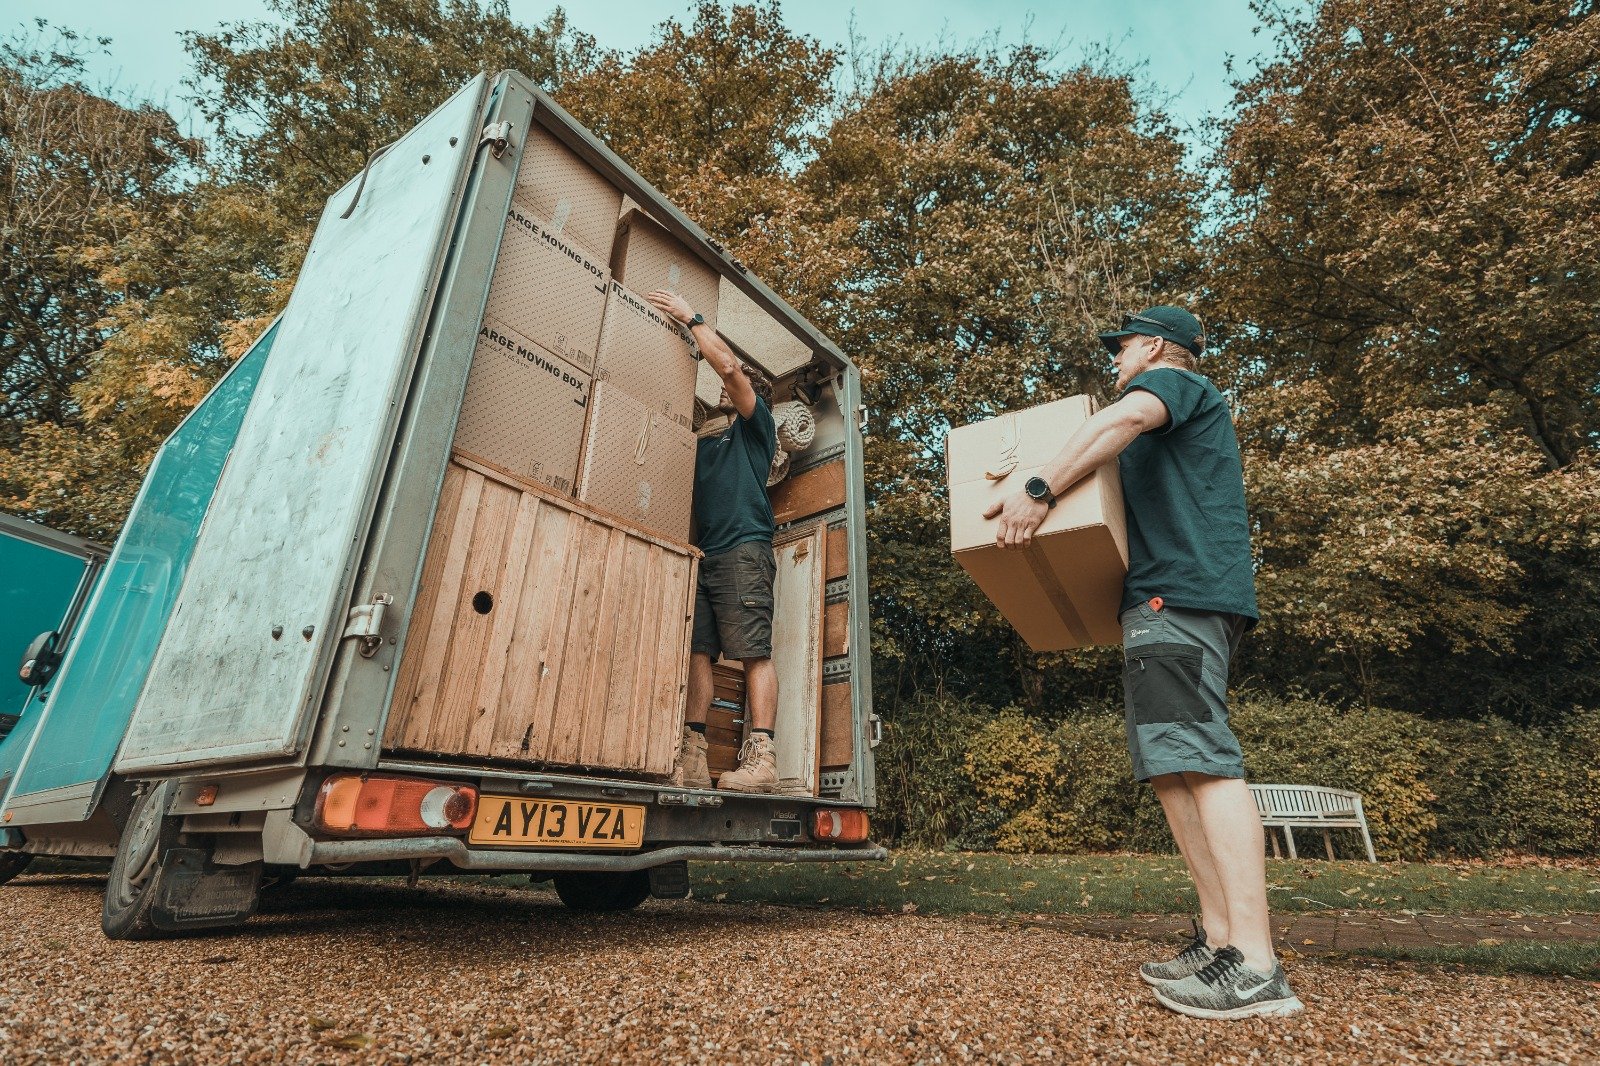 Claverings - Removals, Clearance & Storage